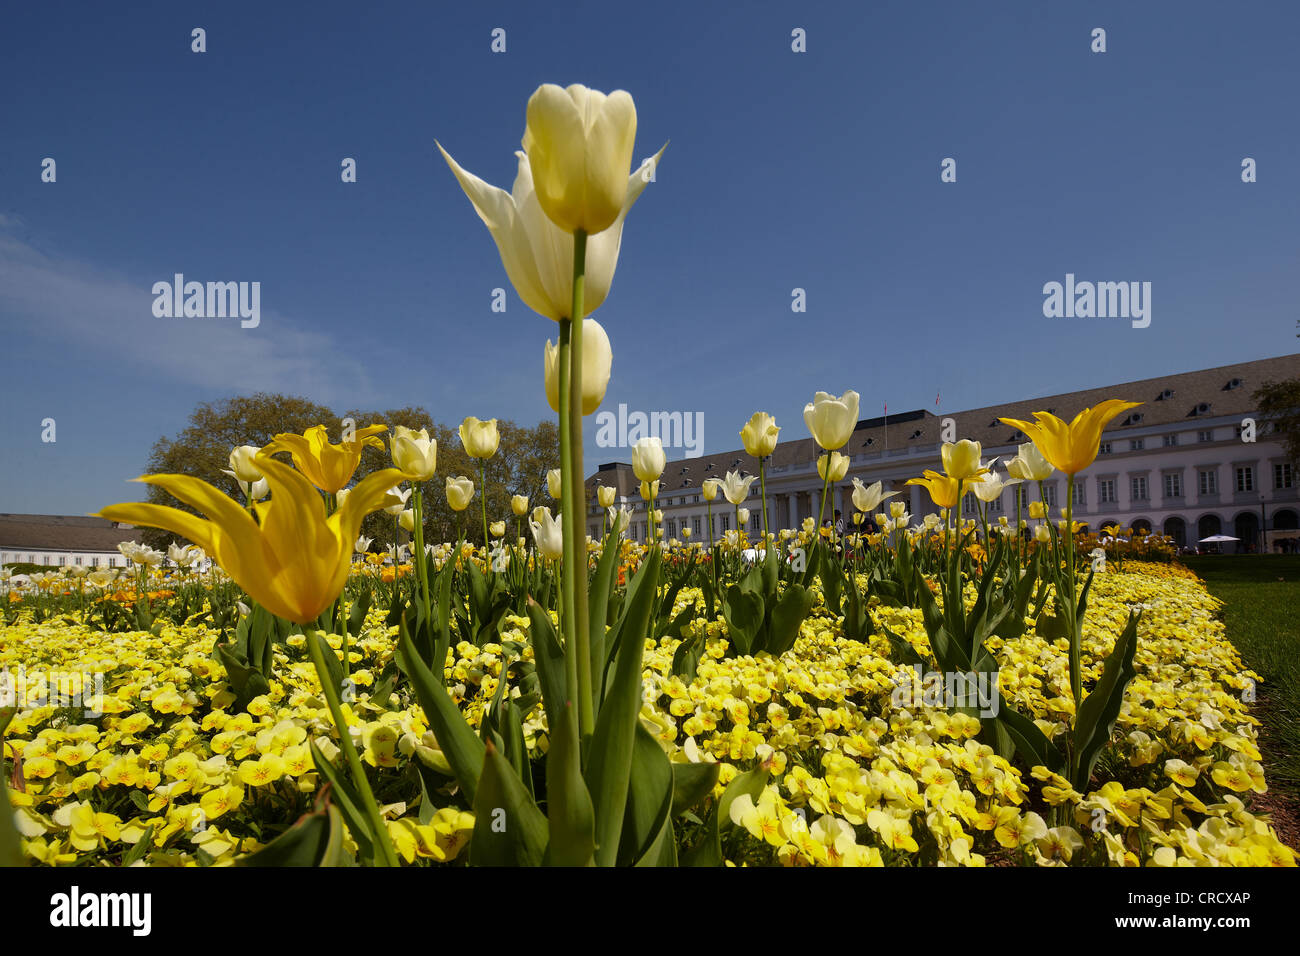 Tulips in front of the Kurfuerstliches Schloss or Electoral Palace Koblenz, Rhineland-Palatinate, Germany, Europe Stock Photo